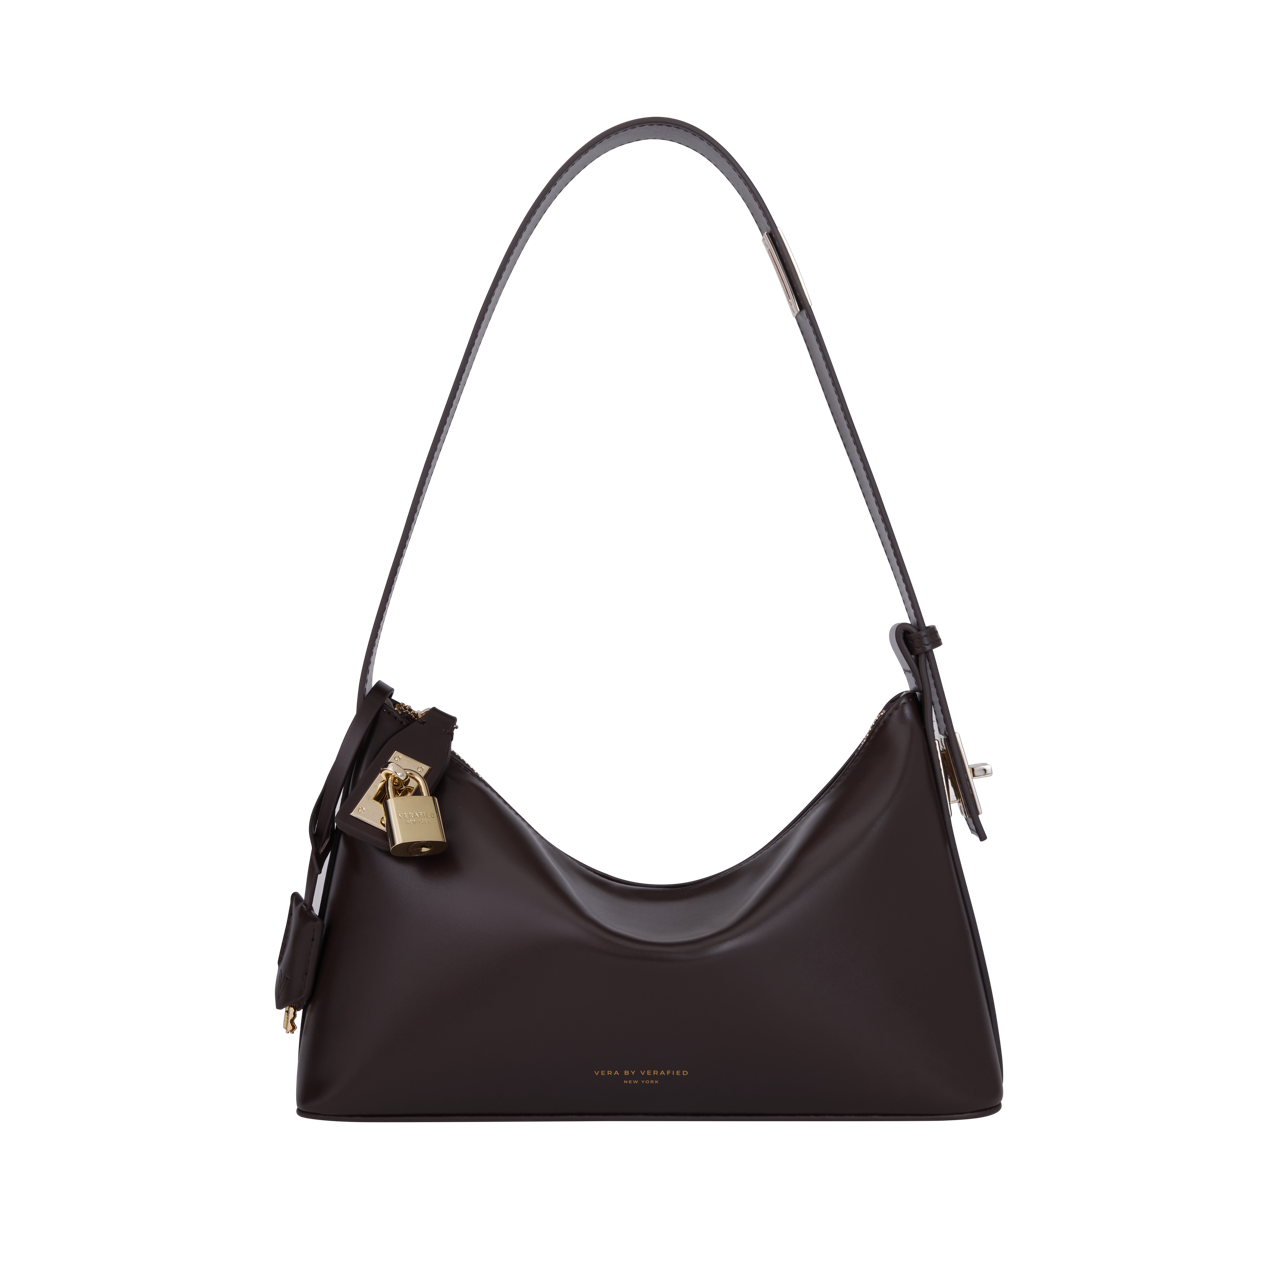 Gold Chocolate Hobo Bag(Pre-Order Only. Will Ship in Mid-May)